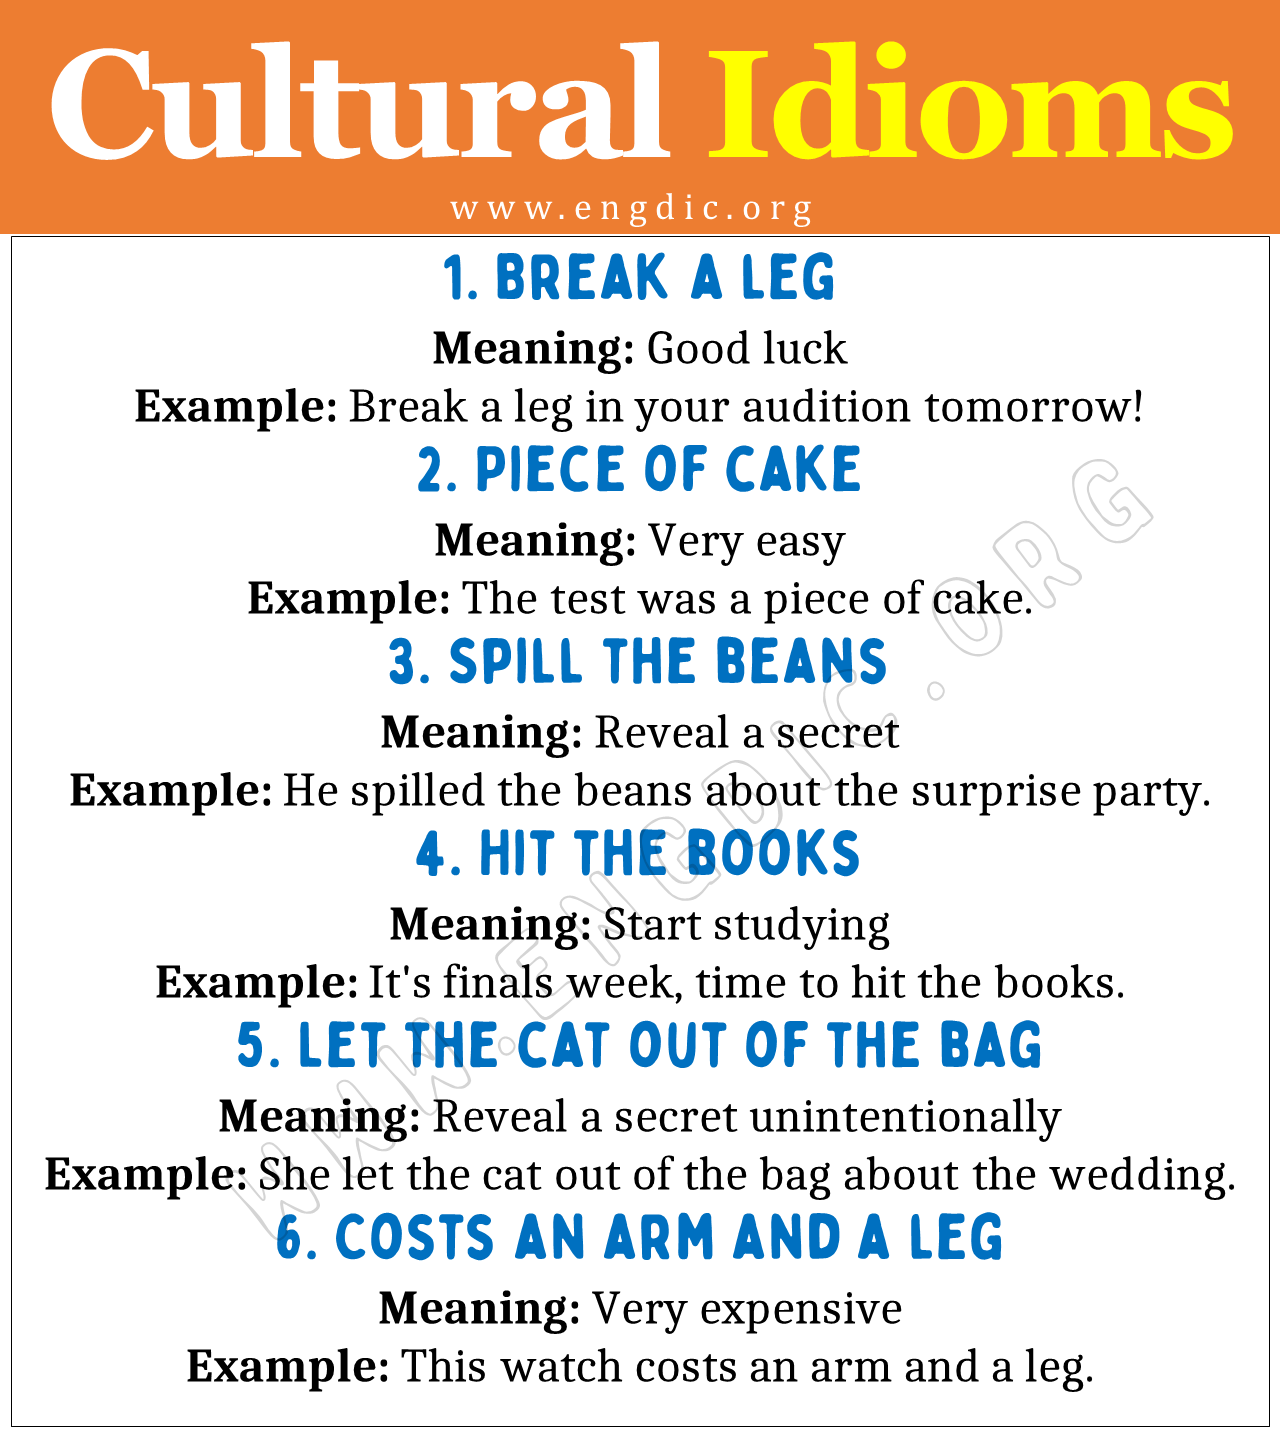 Cultural Idioms (With Meaning and Examples) - EngDic